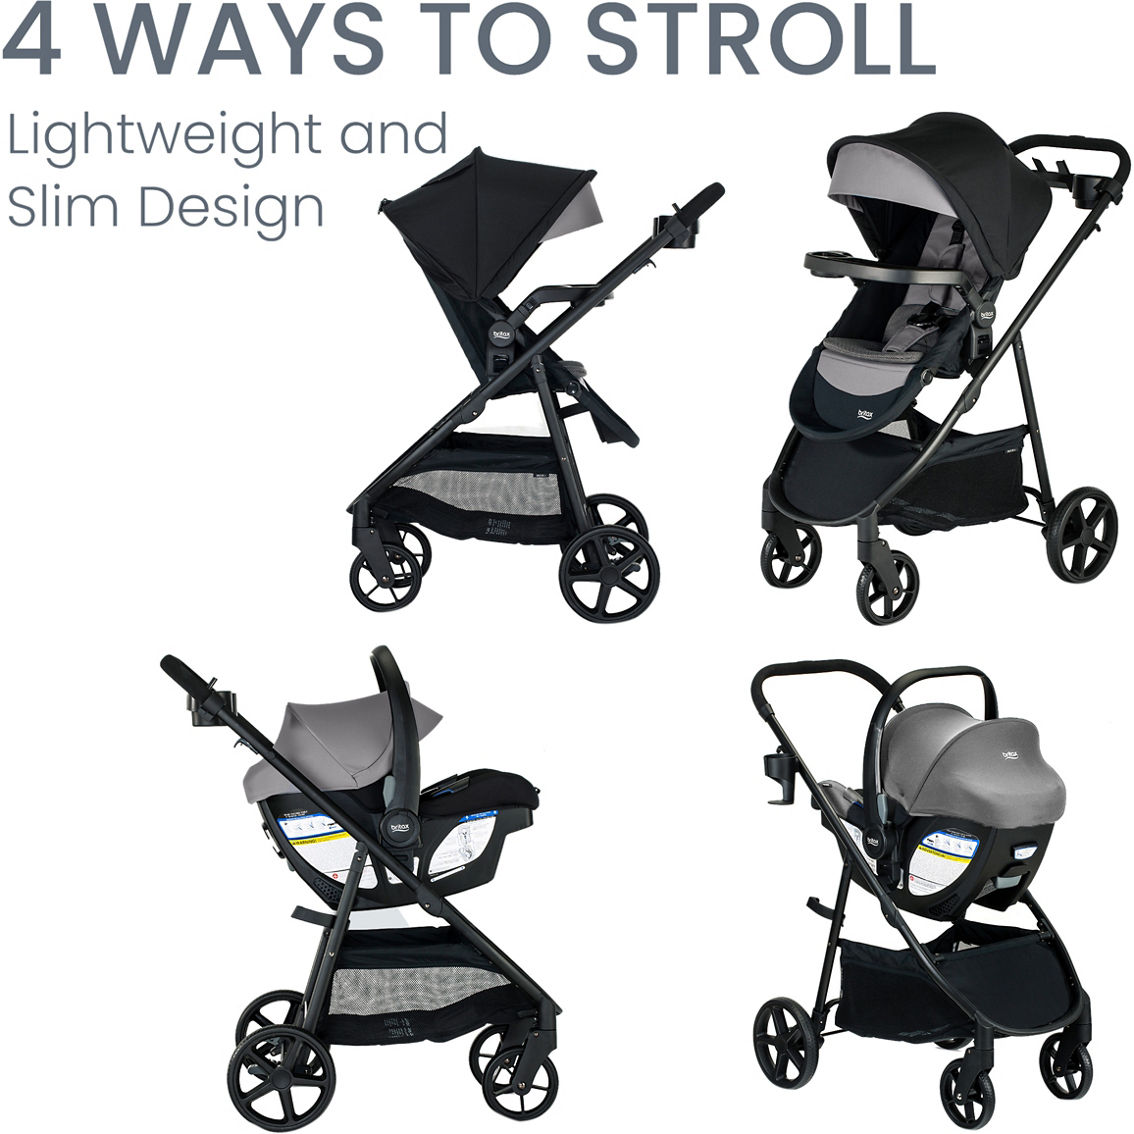 Britax Willow Brook S+ Travel System - Image 2 of 2